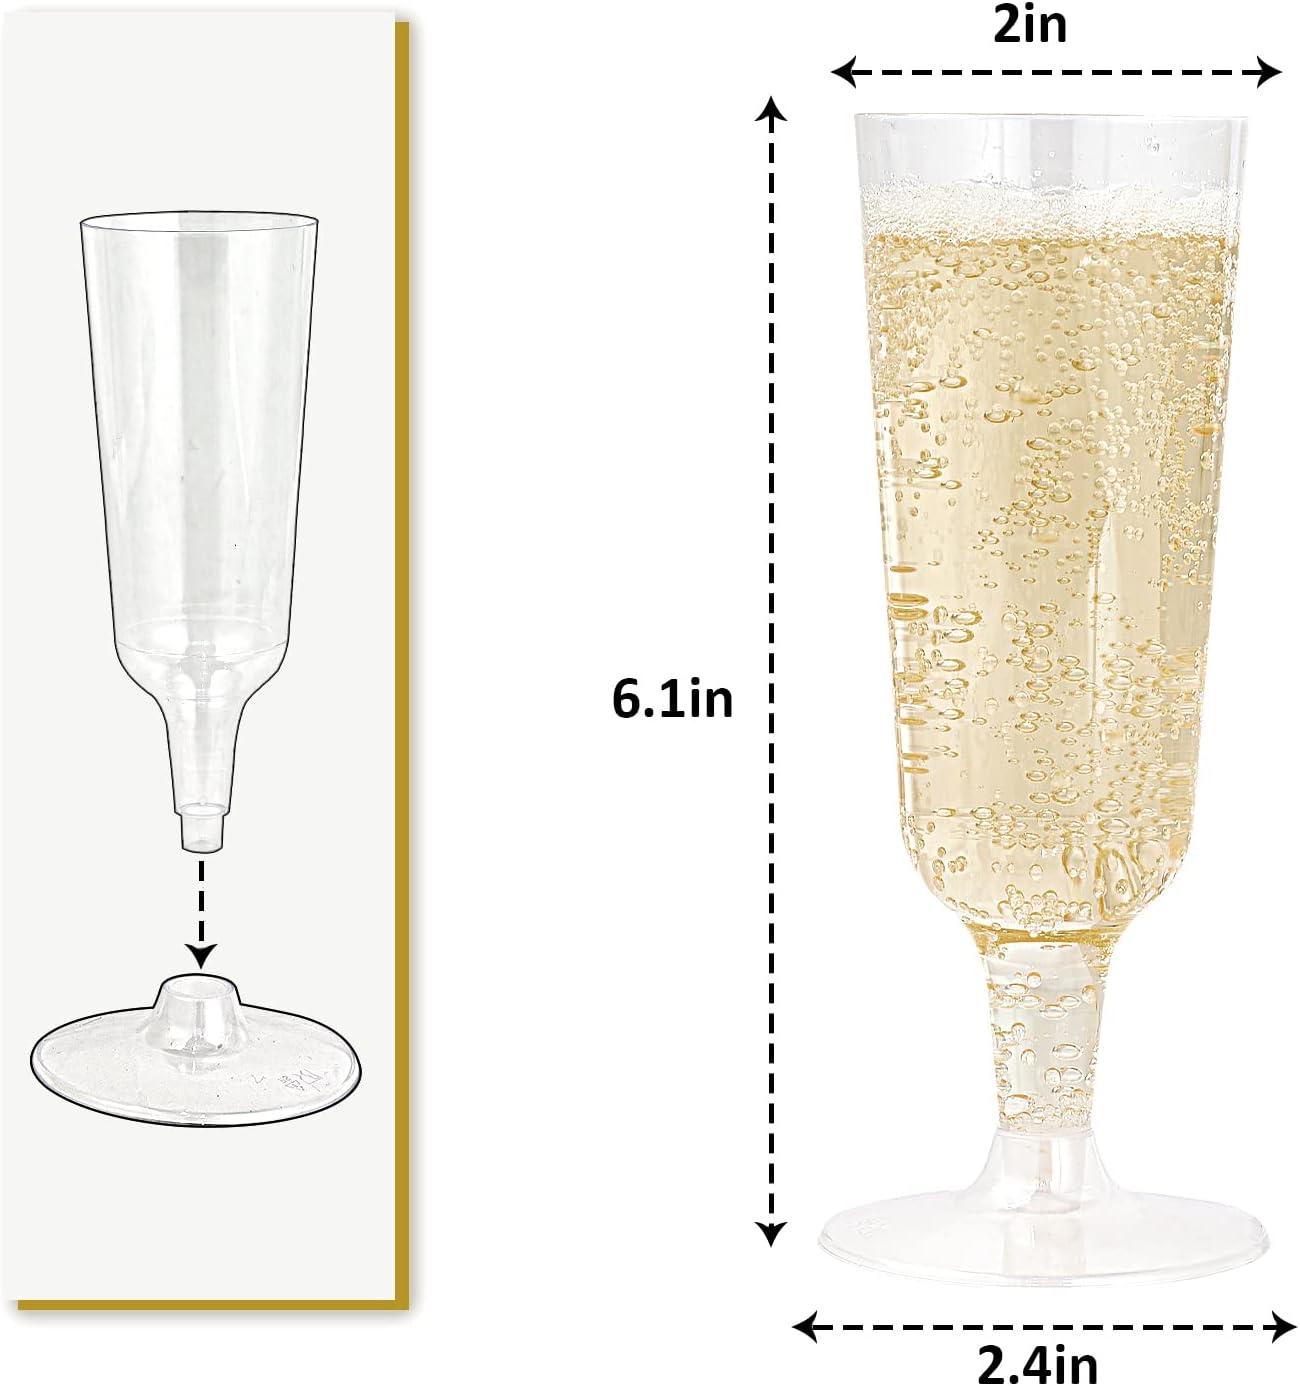 JOLLY CHEF 48 Pack Plastic Champagne Flutes 9 oz